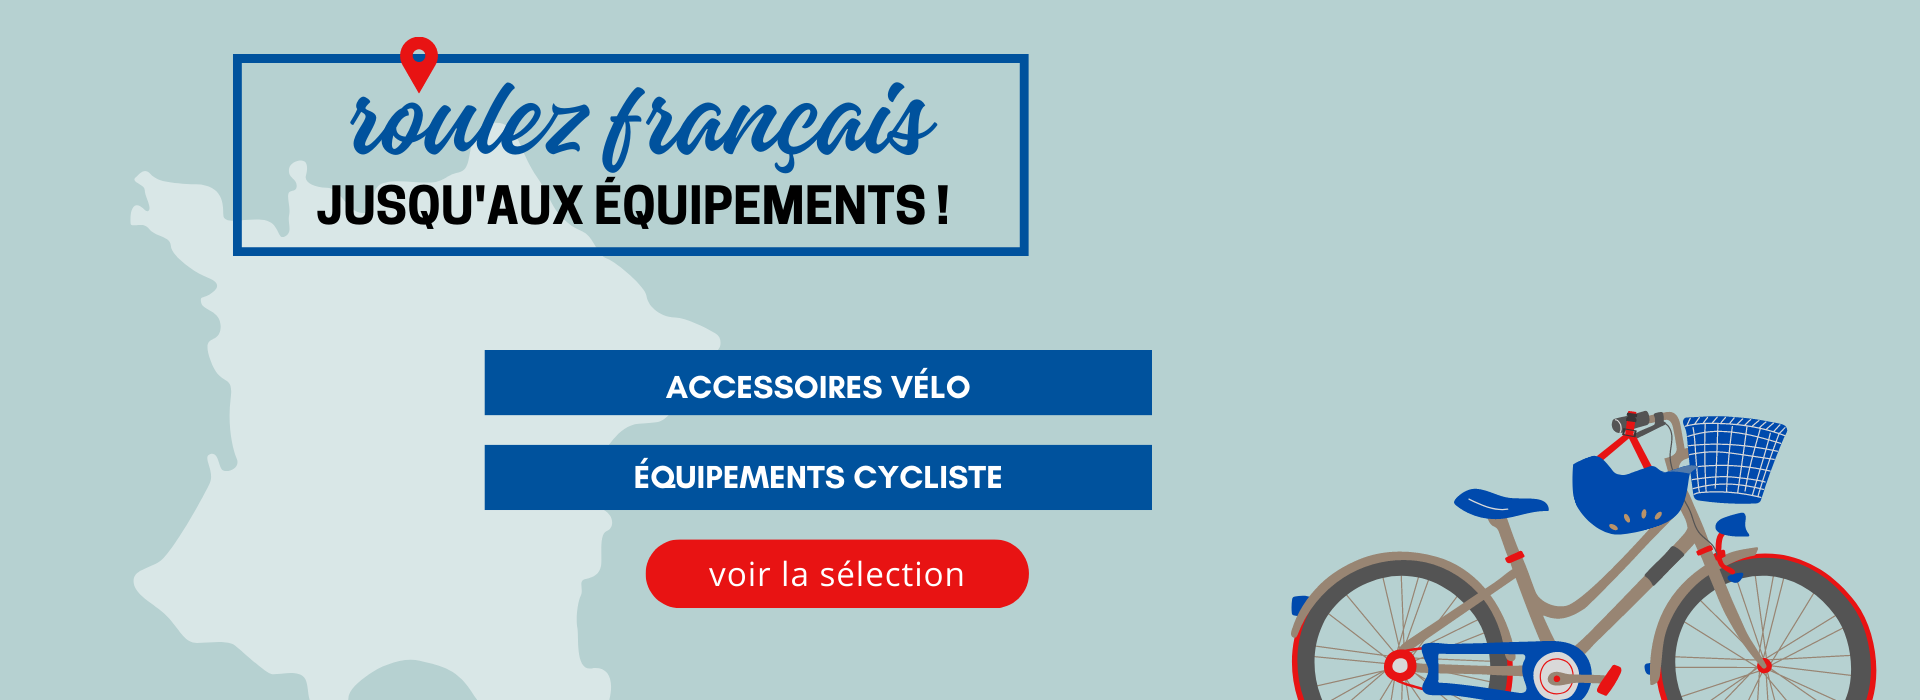 accessoires velo made in france